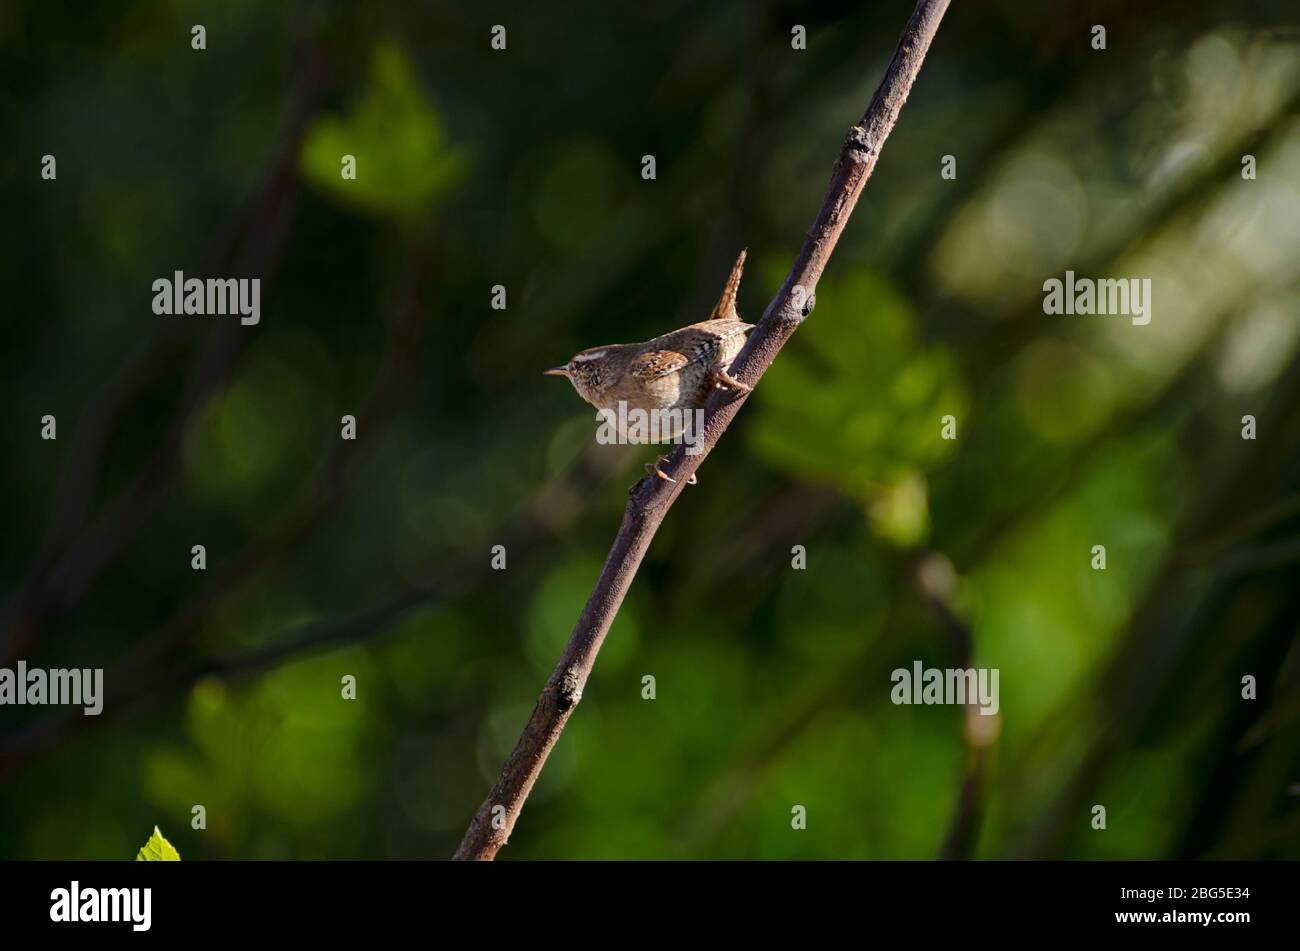 Wren on fig tree branch, blurred background Stock Photo